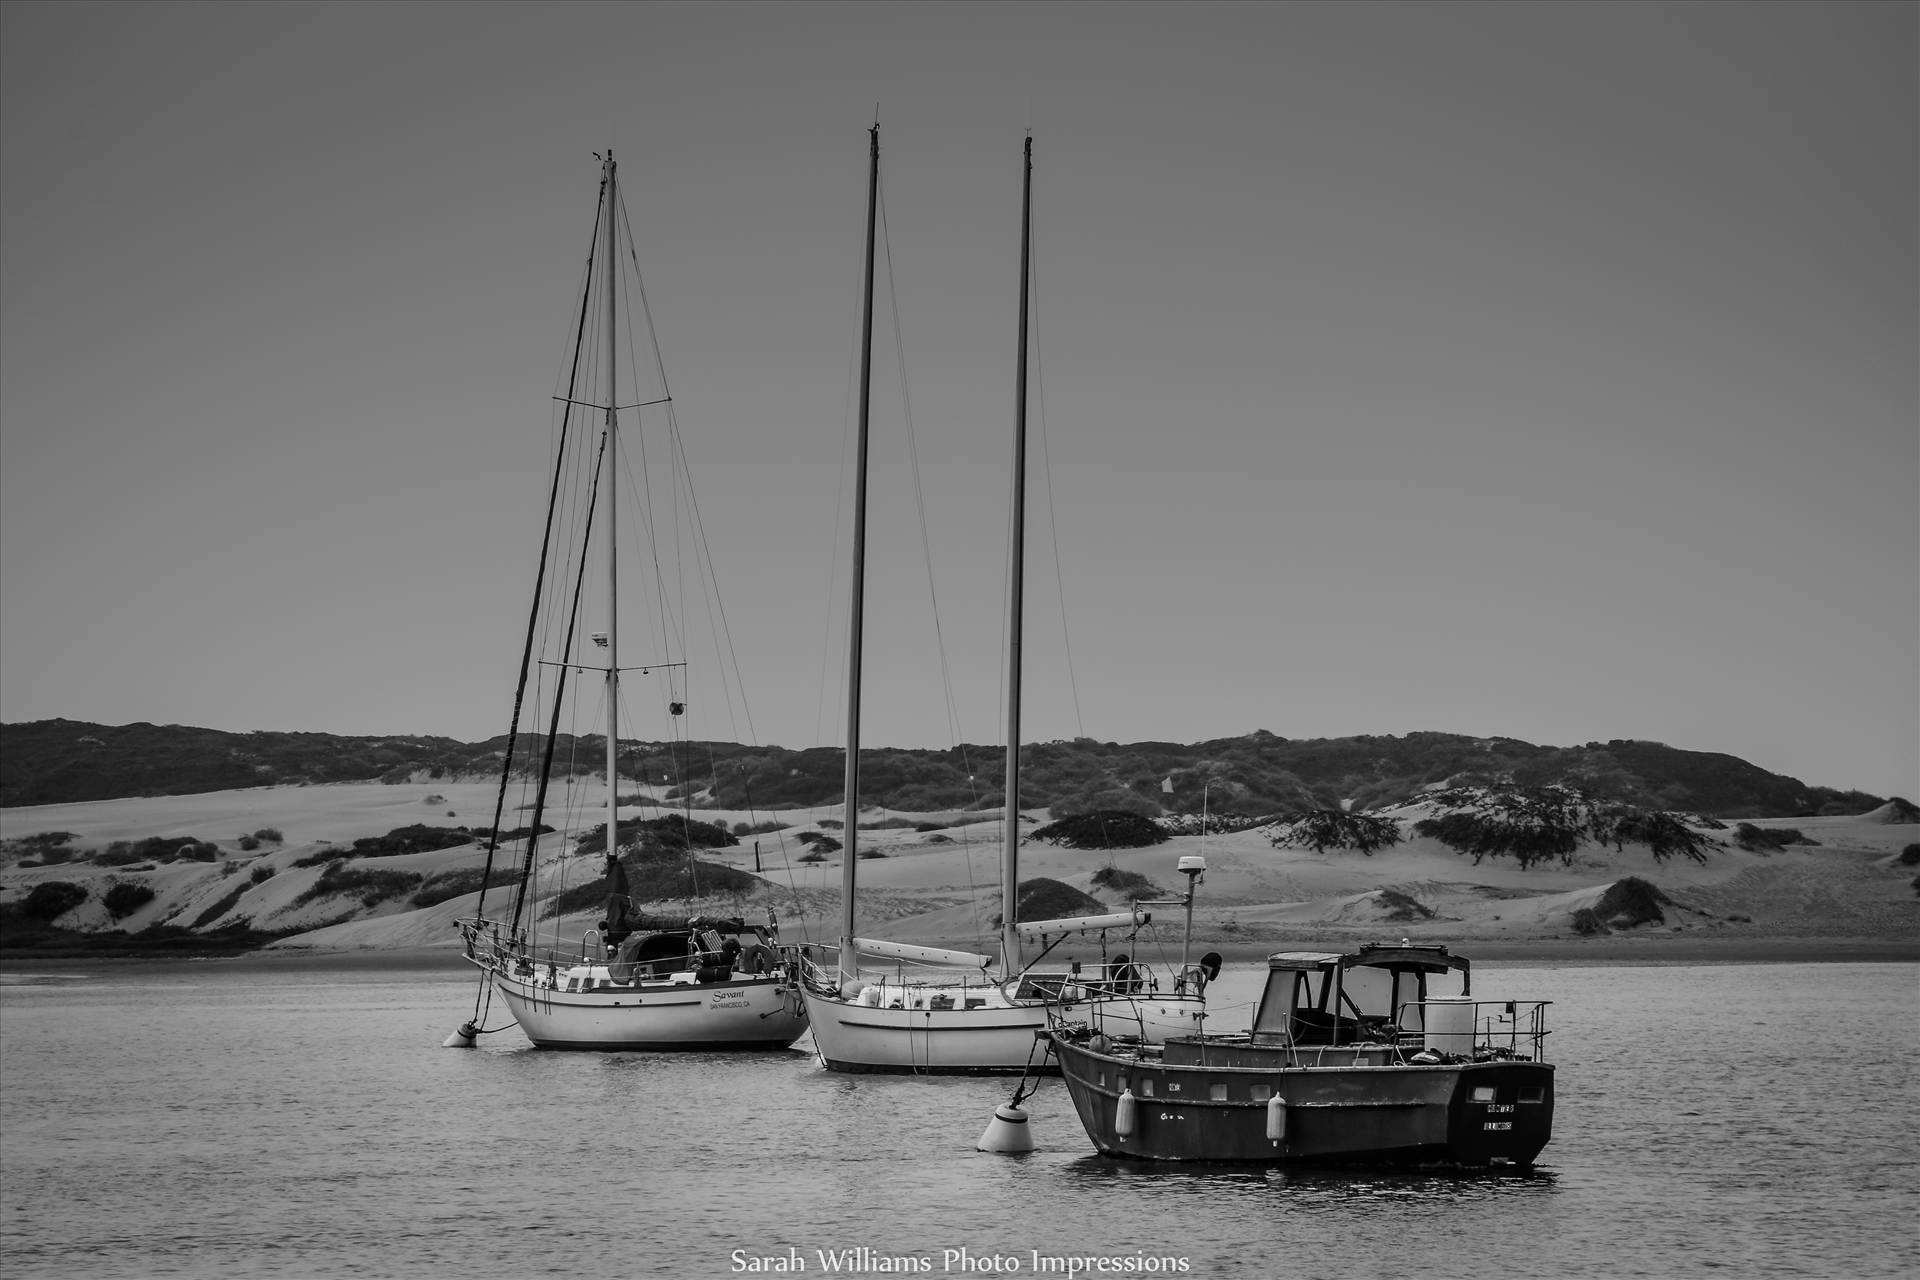 Boats in Morro Bay.jpg undefined by Sarah Williams